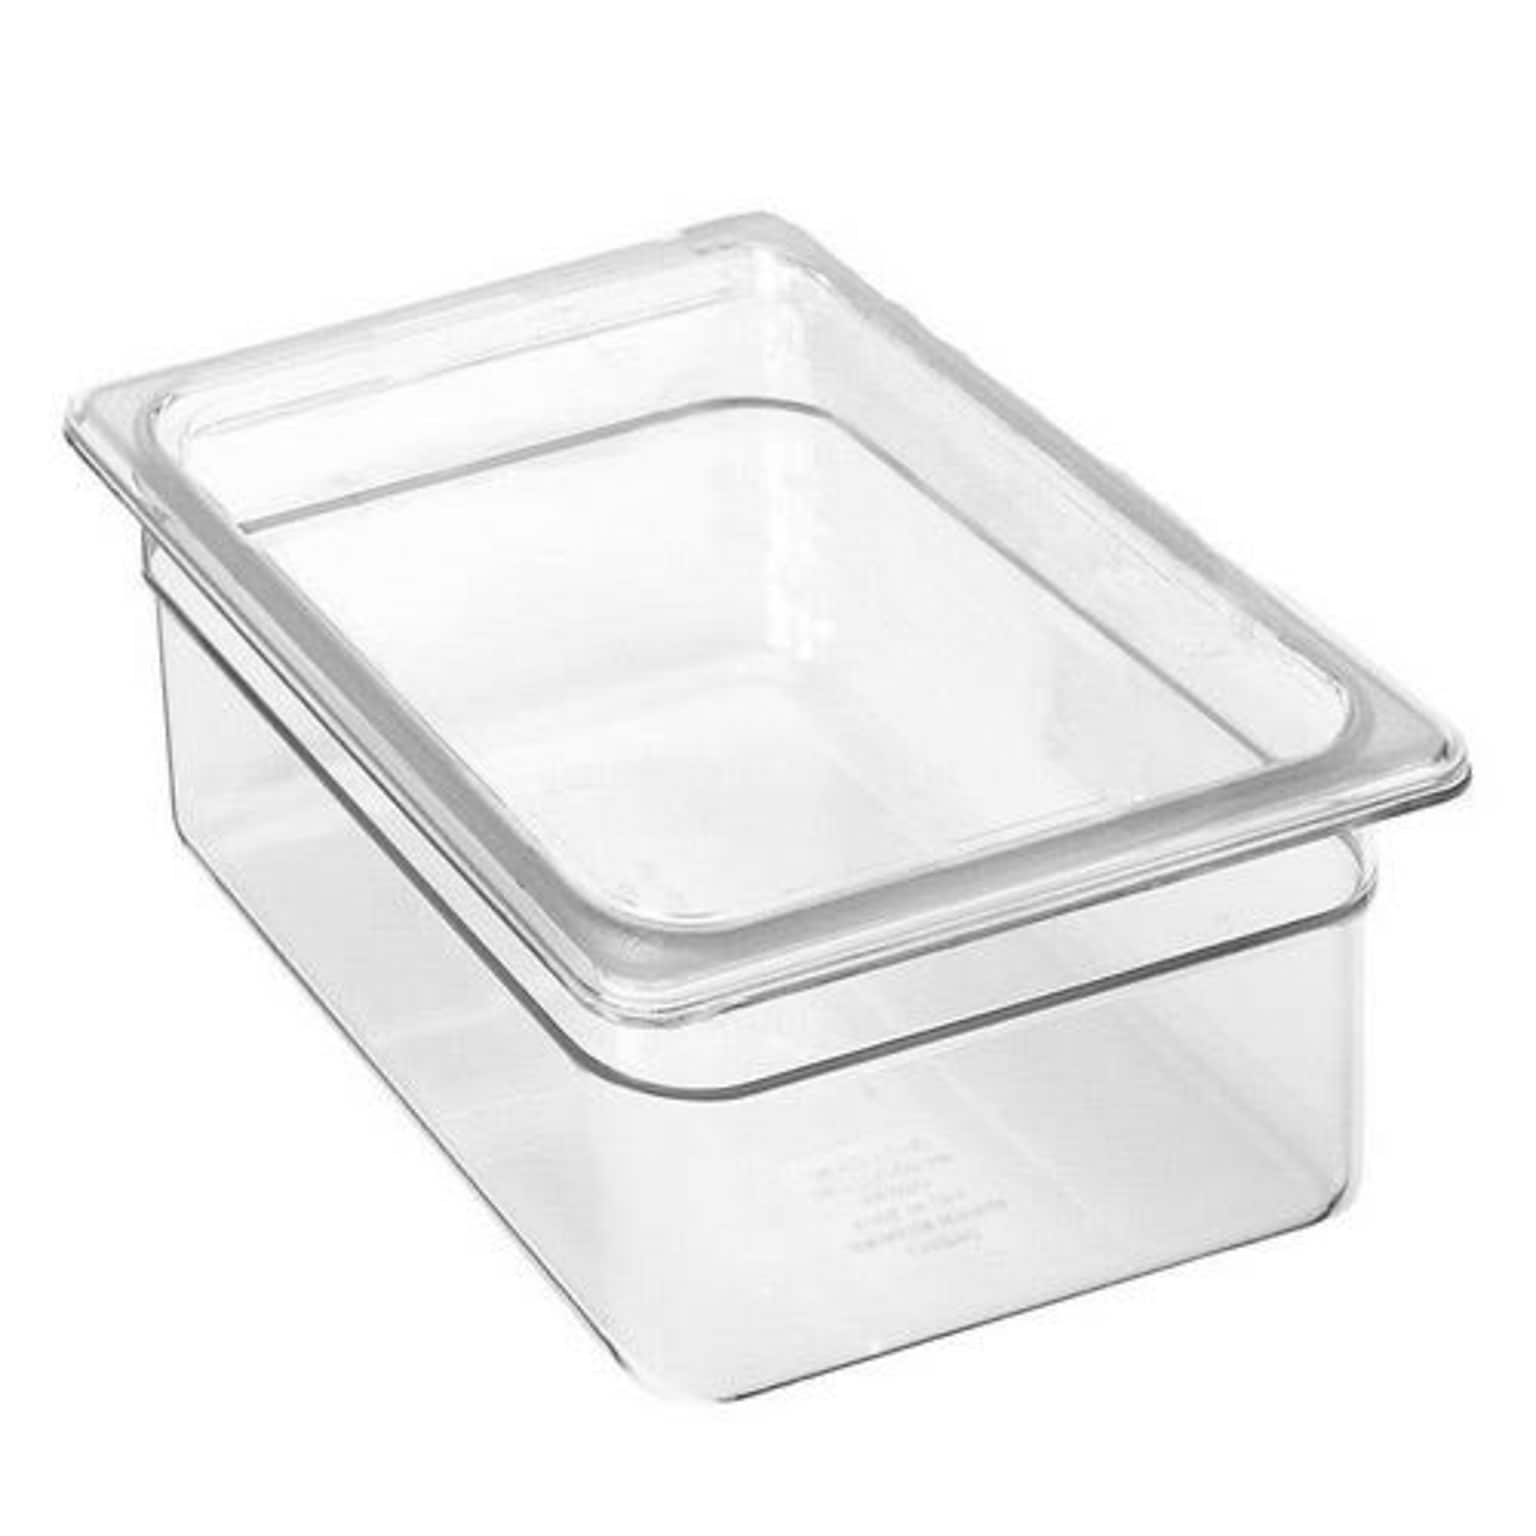 Cambro 1/2 Size Clear Plastic Food Pan, 7 3/4 H x 12 3/4 W x 10 3/8 D, Clear (28CW135)